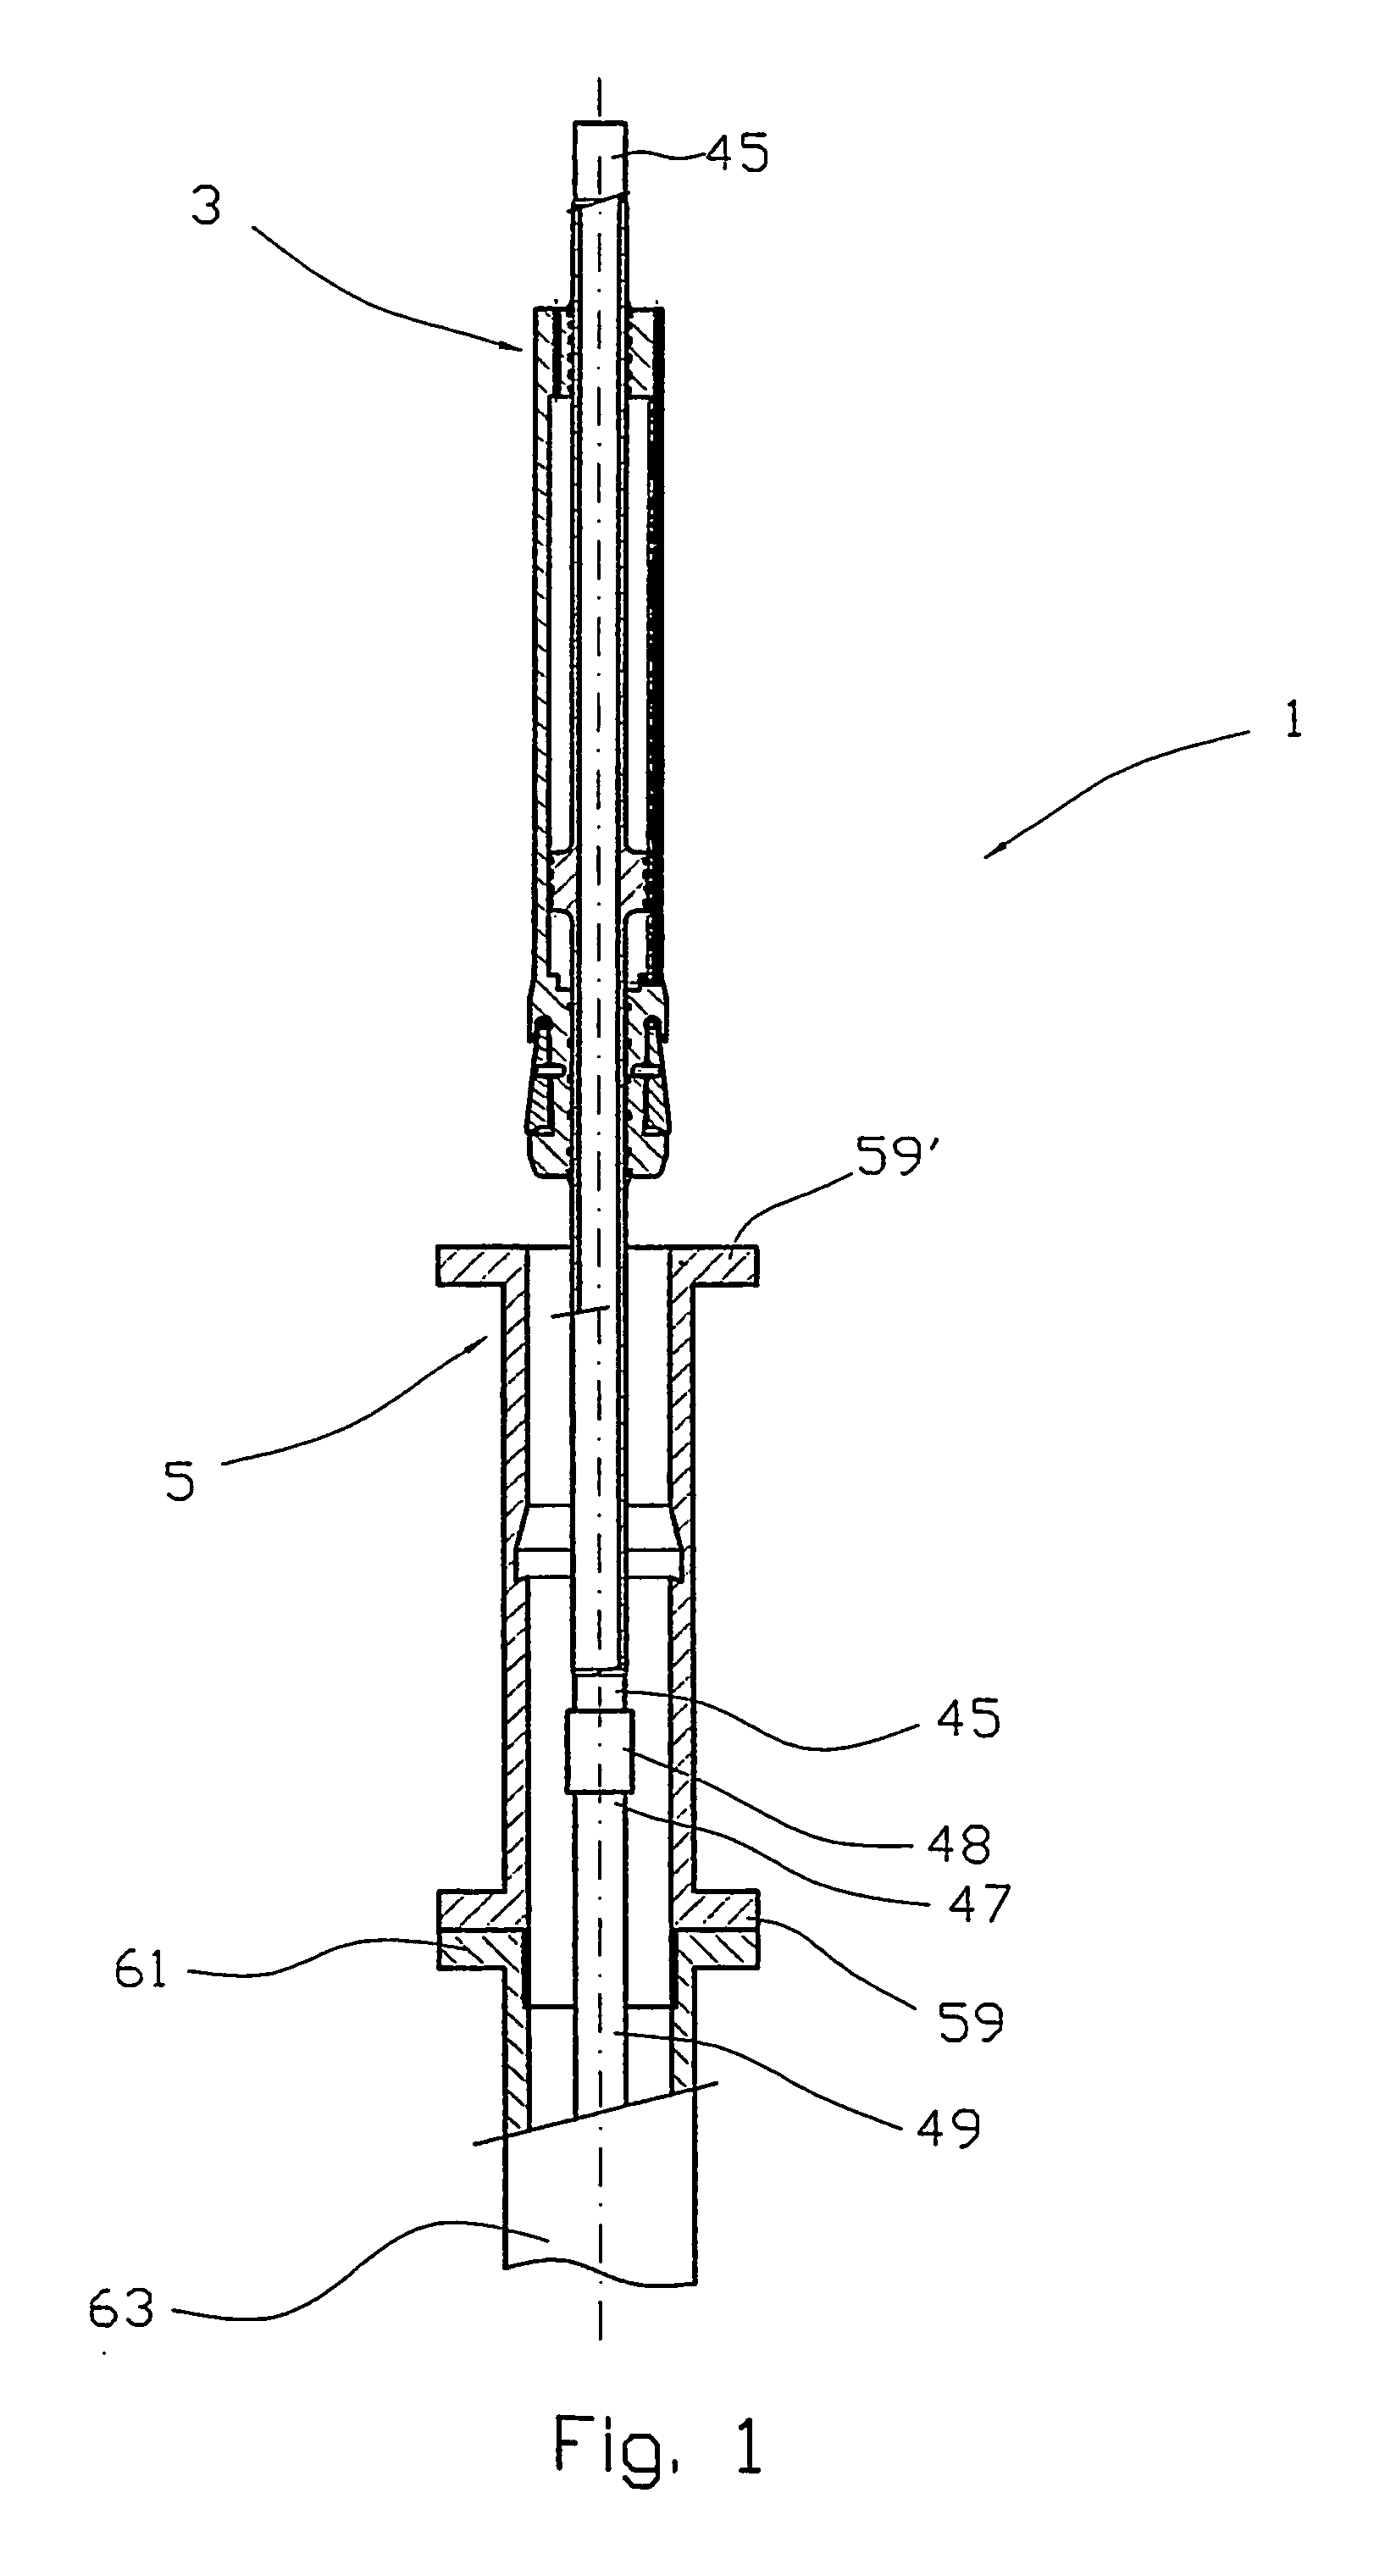 Tensioning system for production tubing in a riser at a floating installation for hydrocarbon production